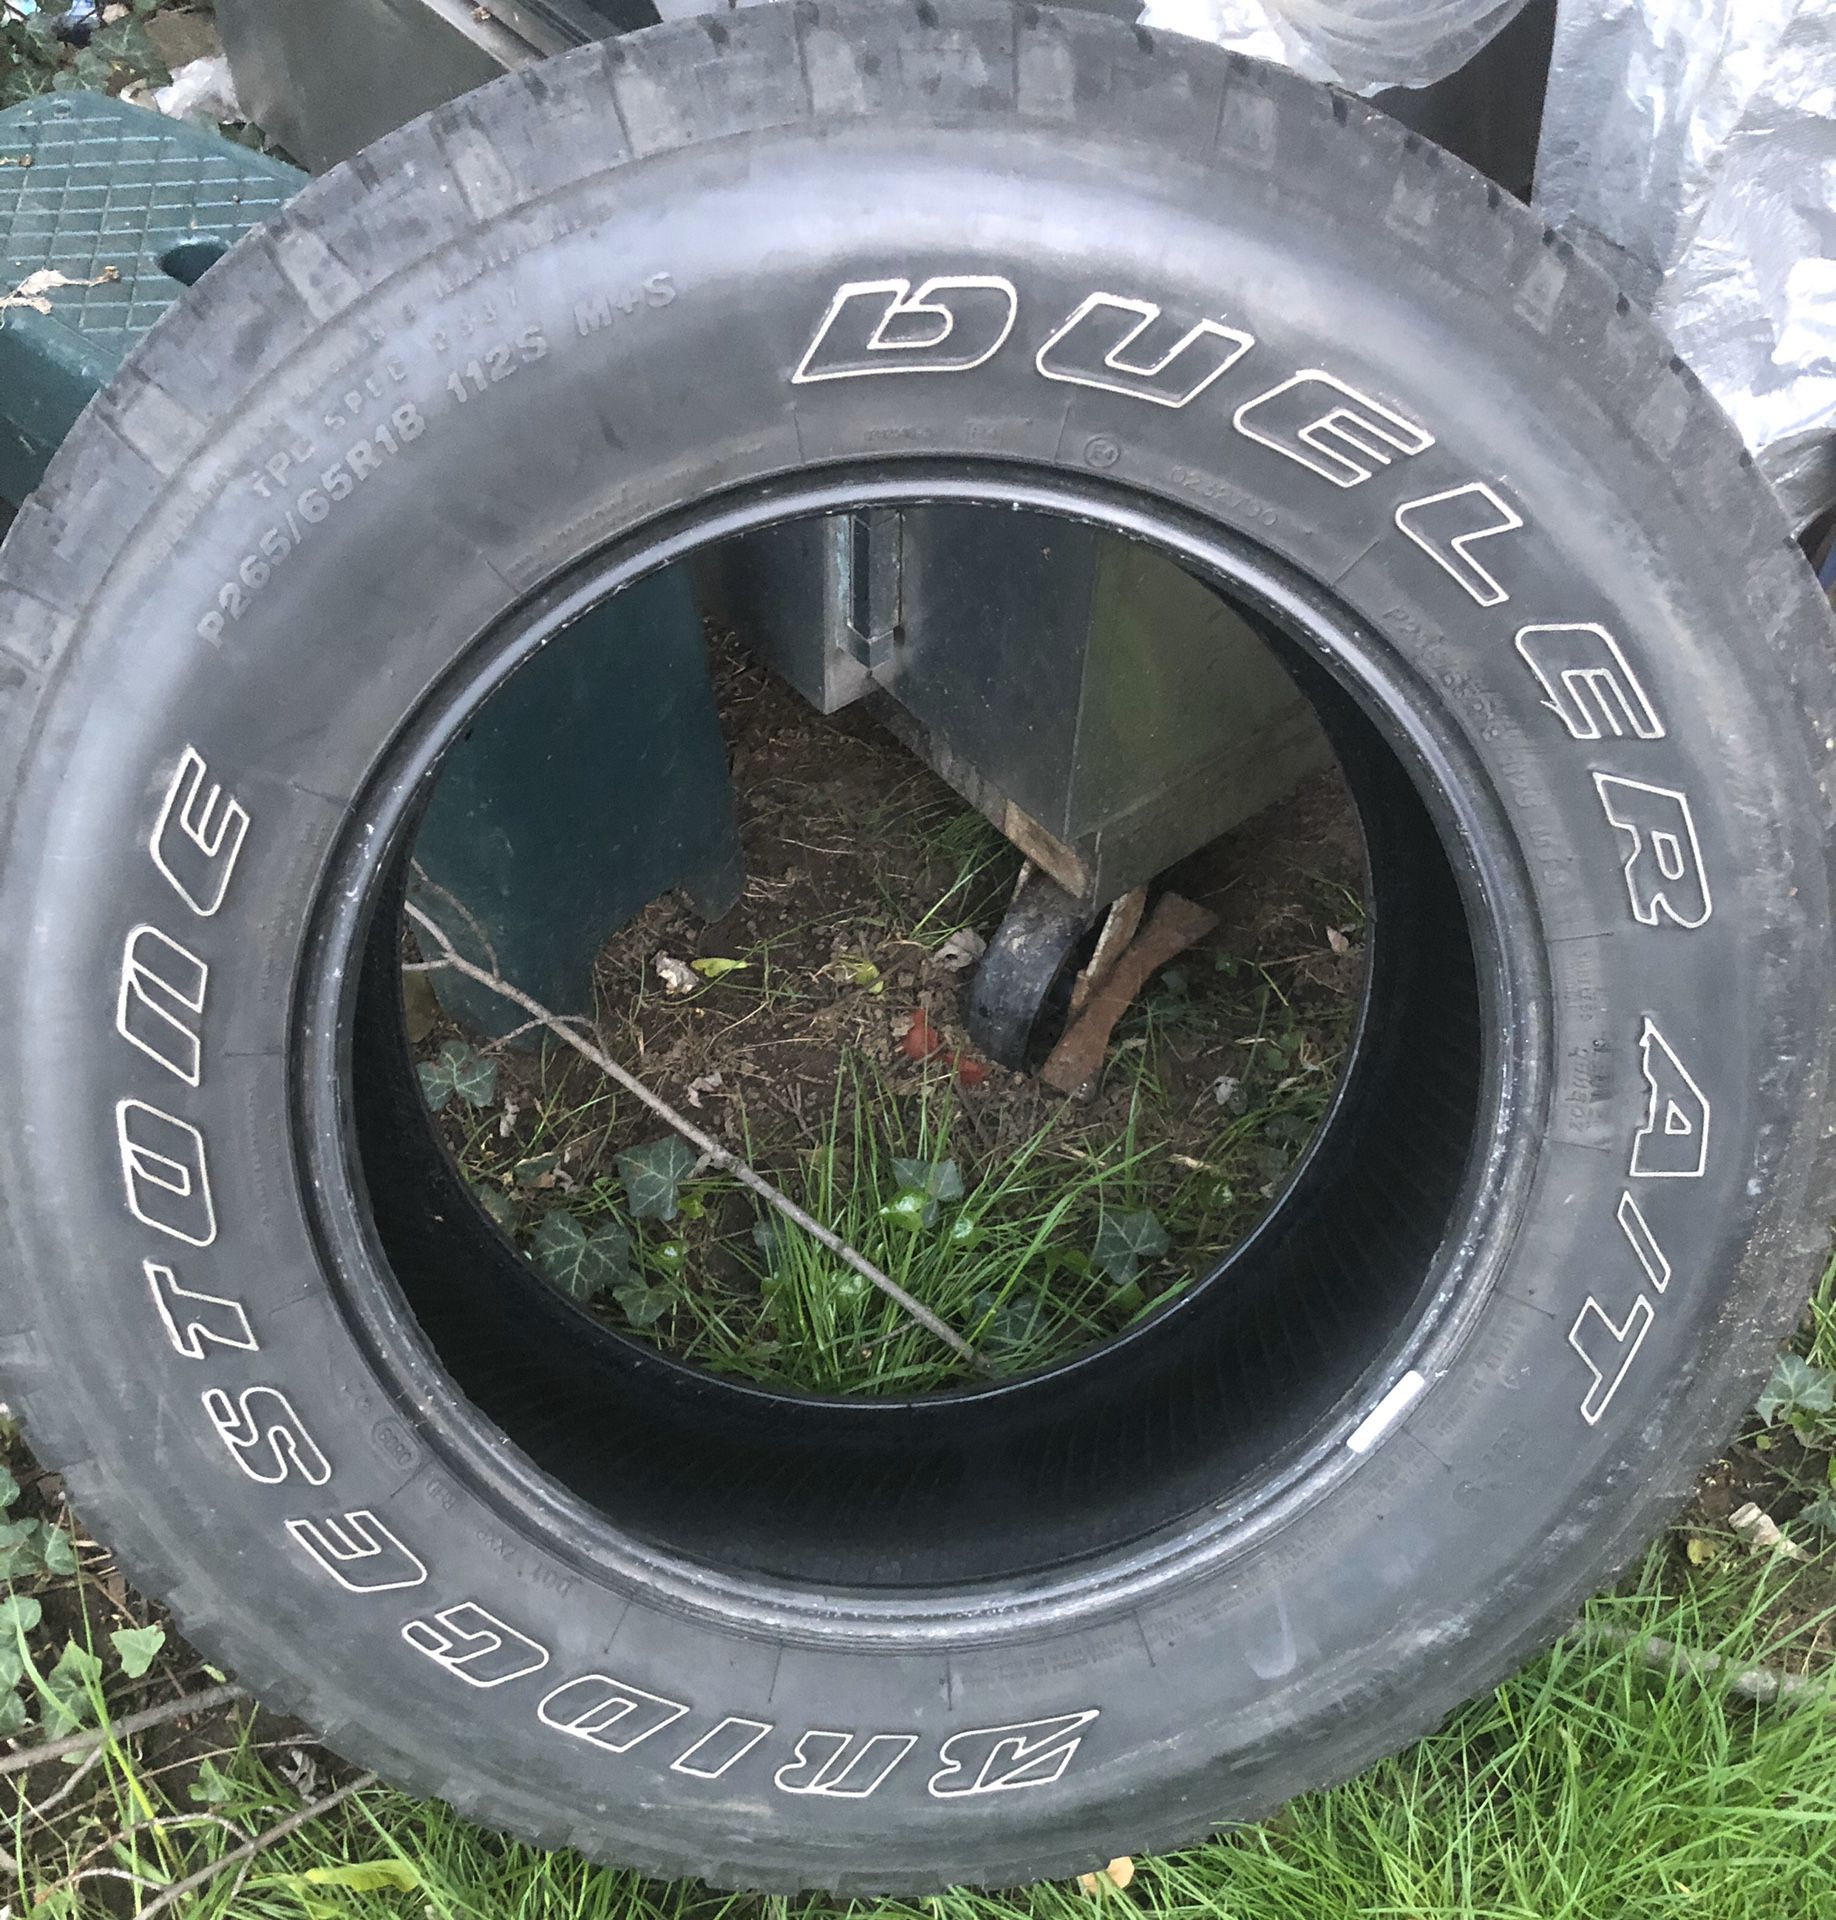 Tires for sale 265/65/18, asking $80